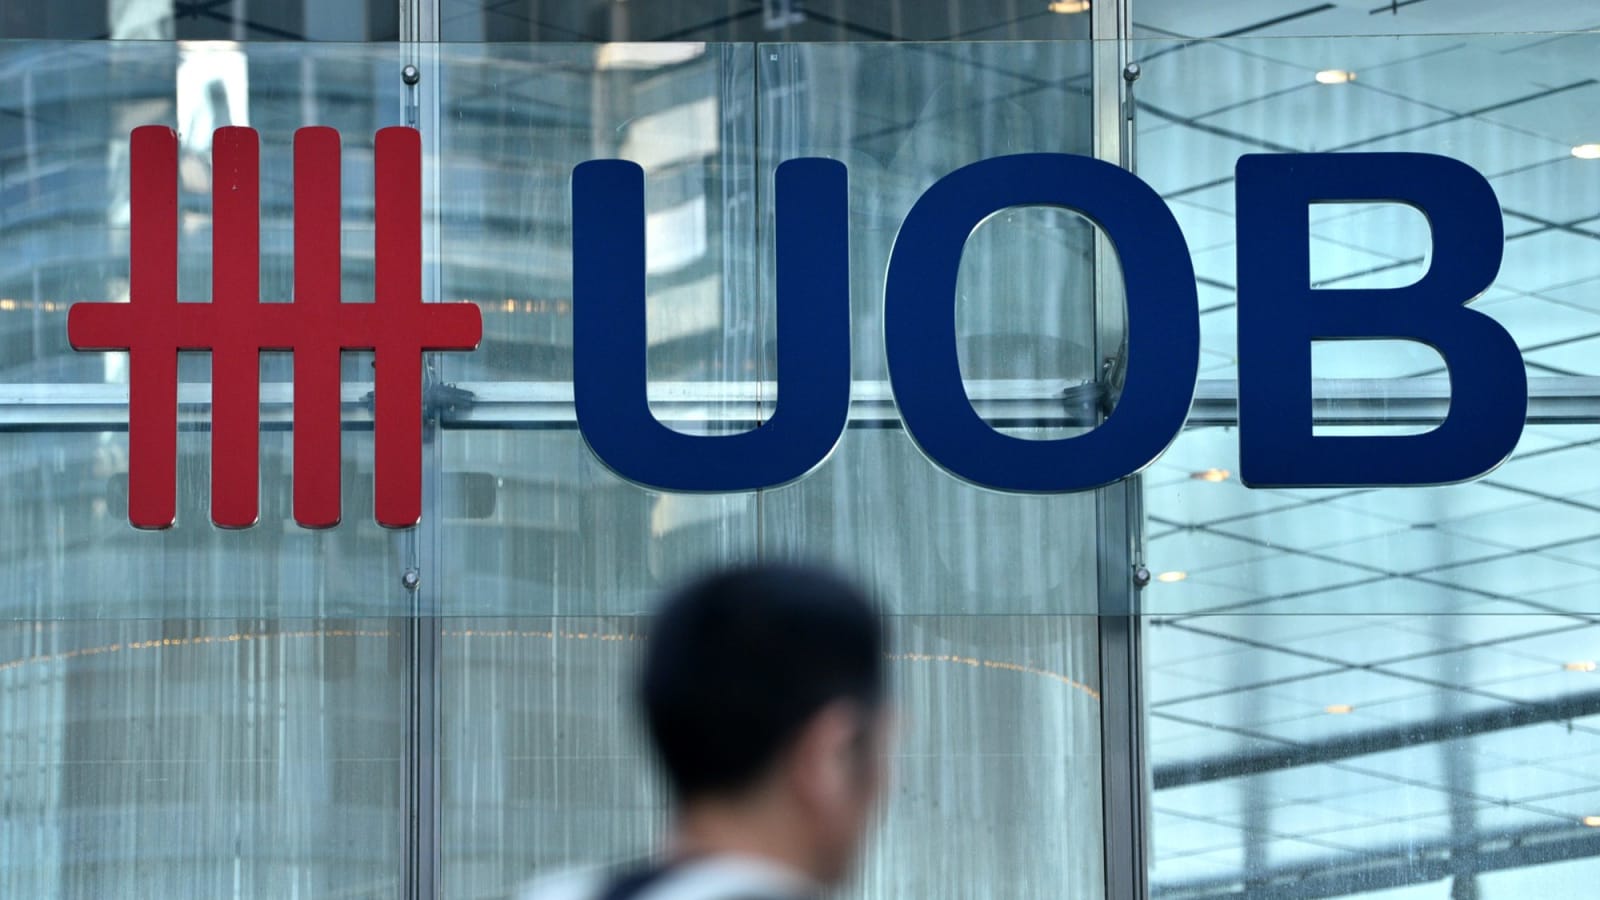 UOB launches gig employment programme for retired employees to take up flexible work